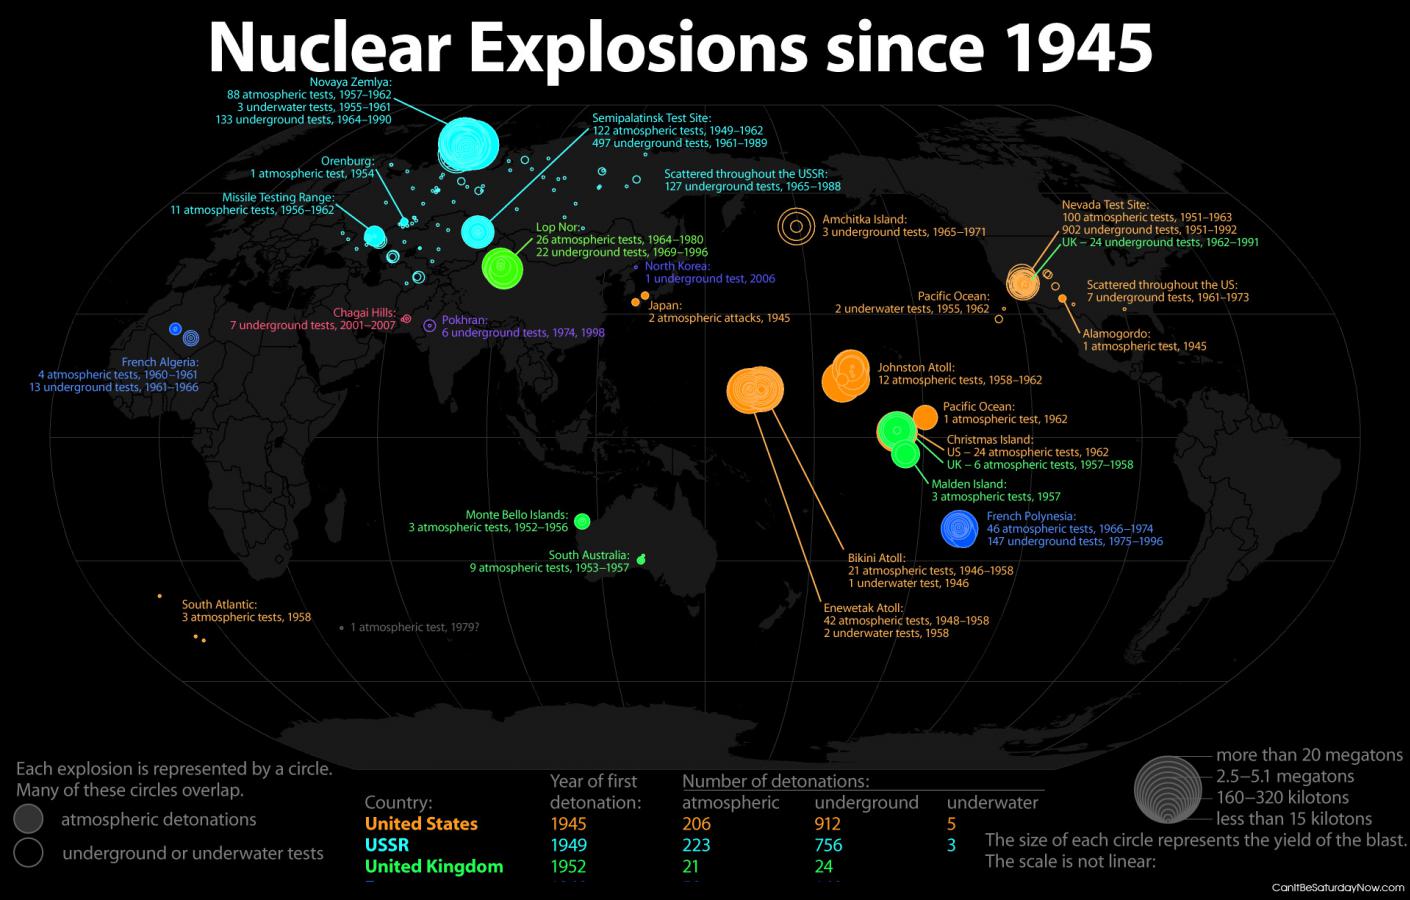 Nuclear test - tests done since 1945... kind of creepy